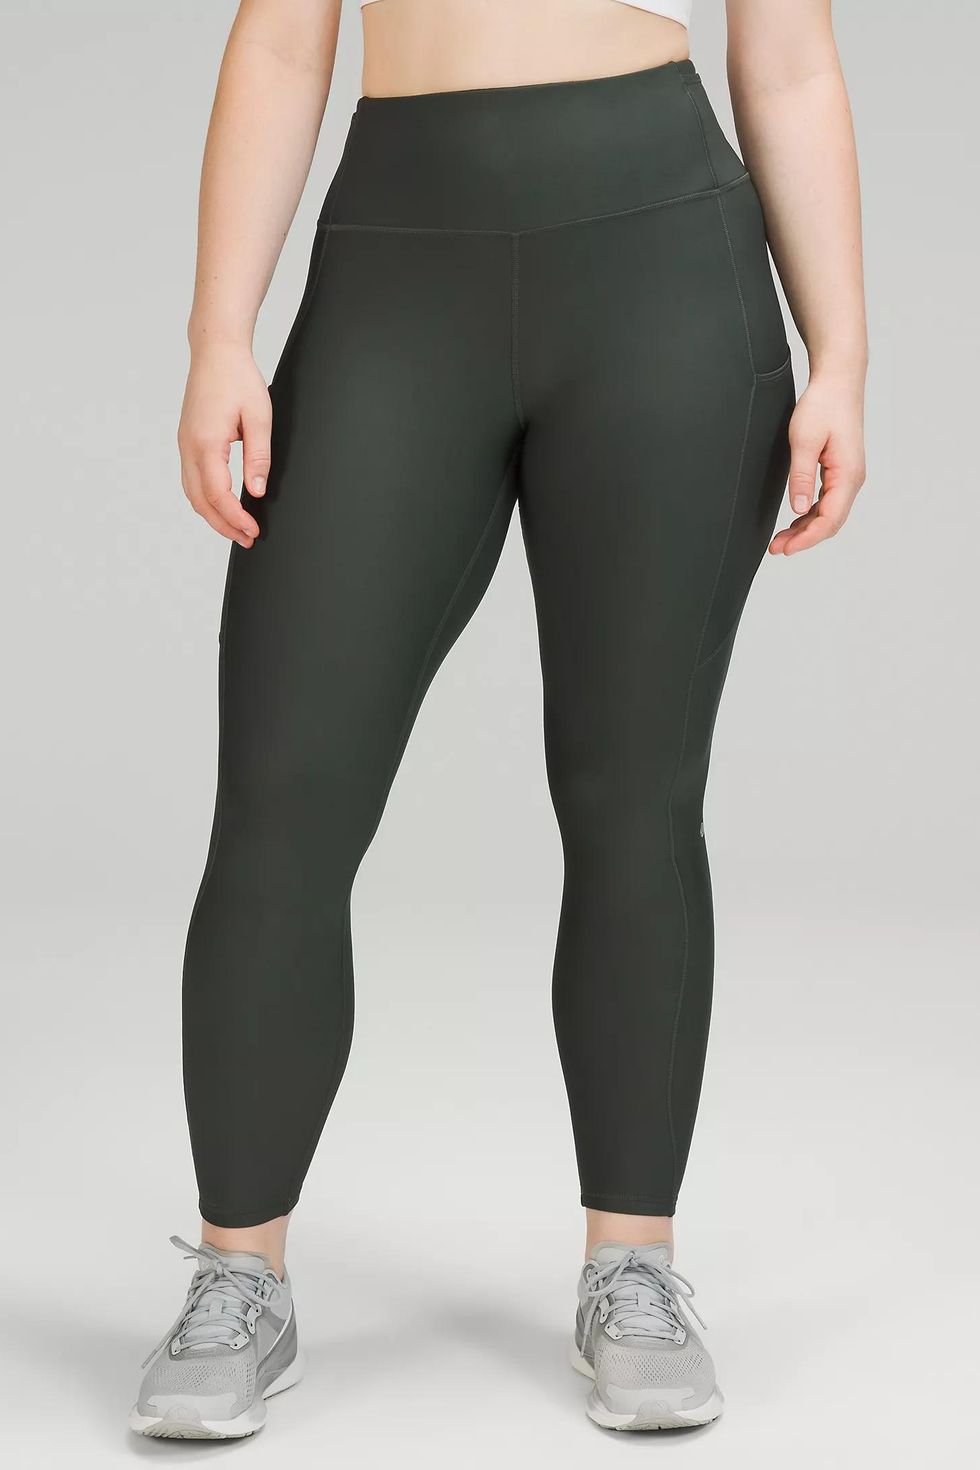 These Highly Rated Fleece-Lined Leggings Are Up to 32% Off at